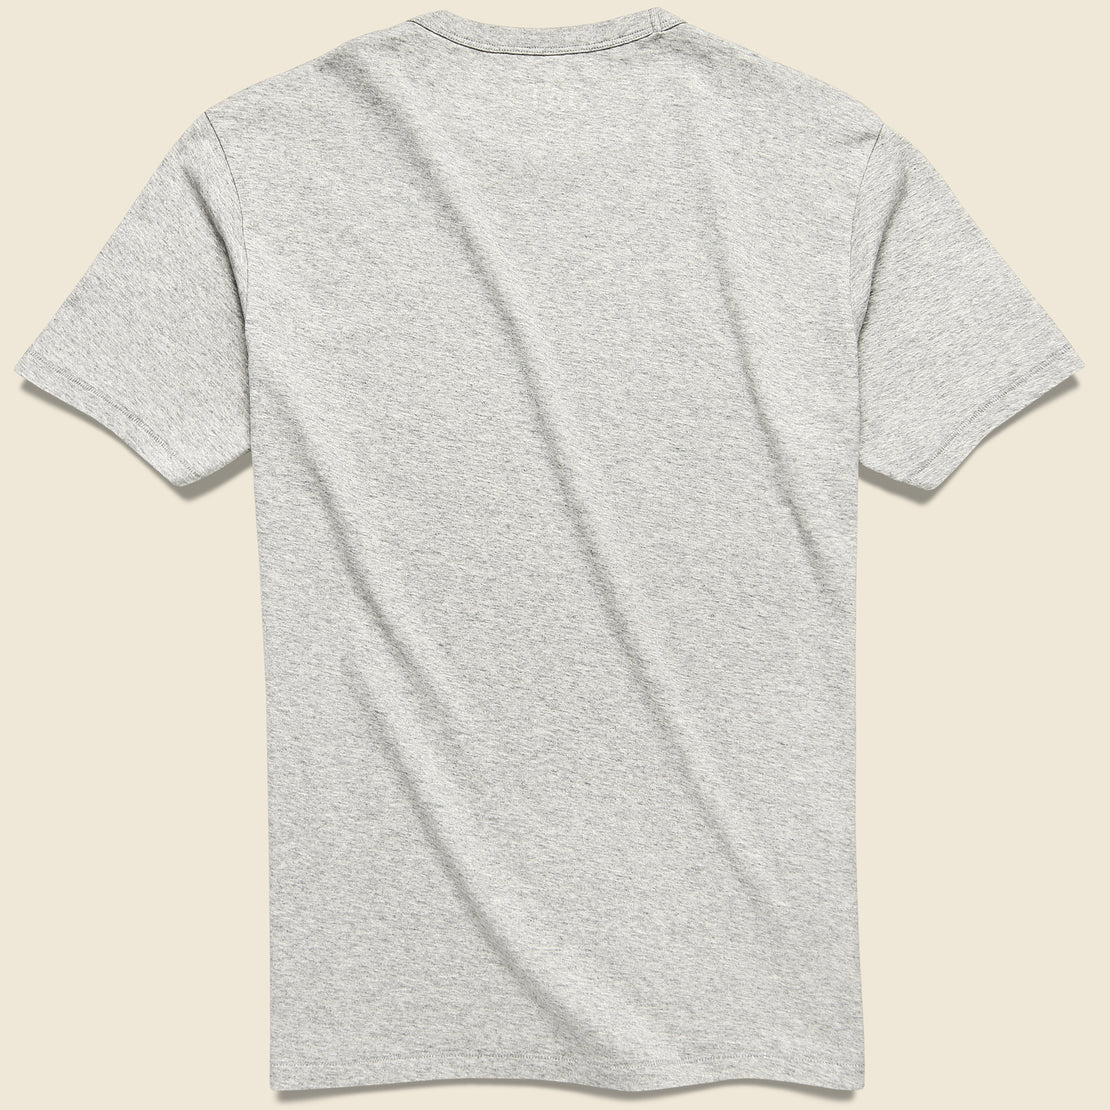 STAG Tee - Heather Grey - STAG - STAG Provisions - Tops - S/S Tee